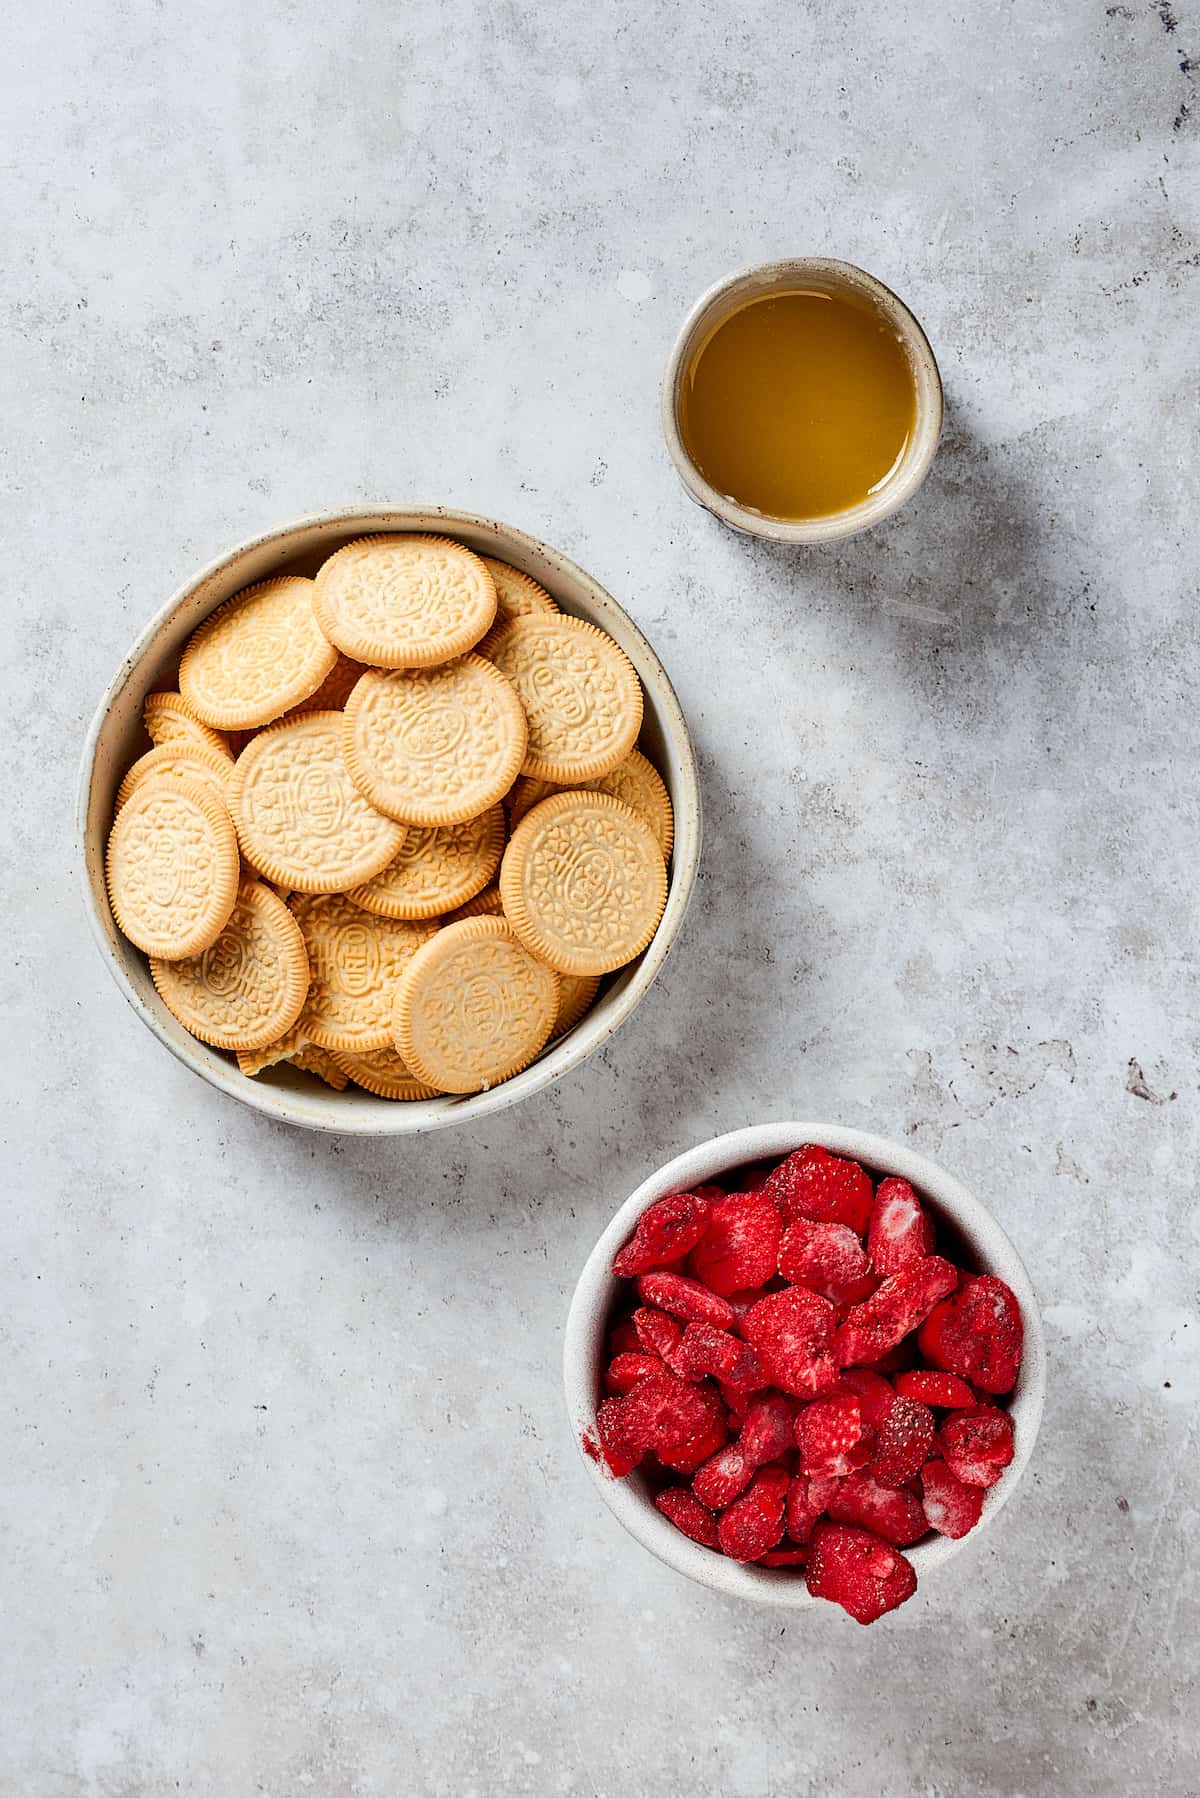 Topping ingredients for strawberry crunch cake are shown including pieces of golden Oreos, freeze-dried strawberries and vanilla.